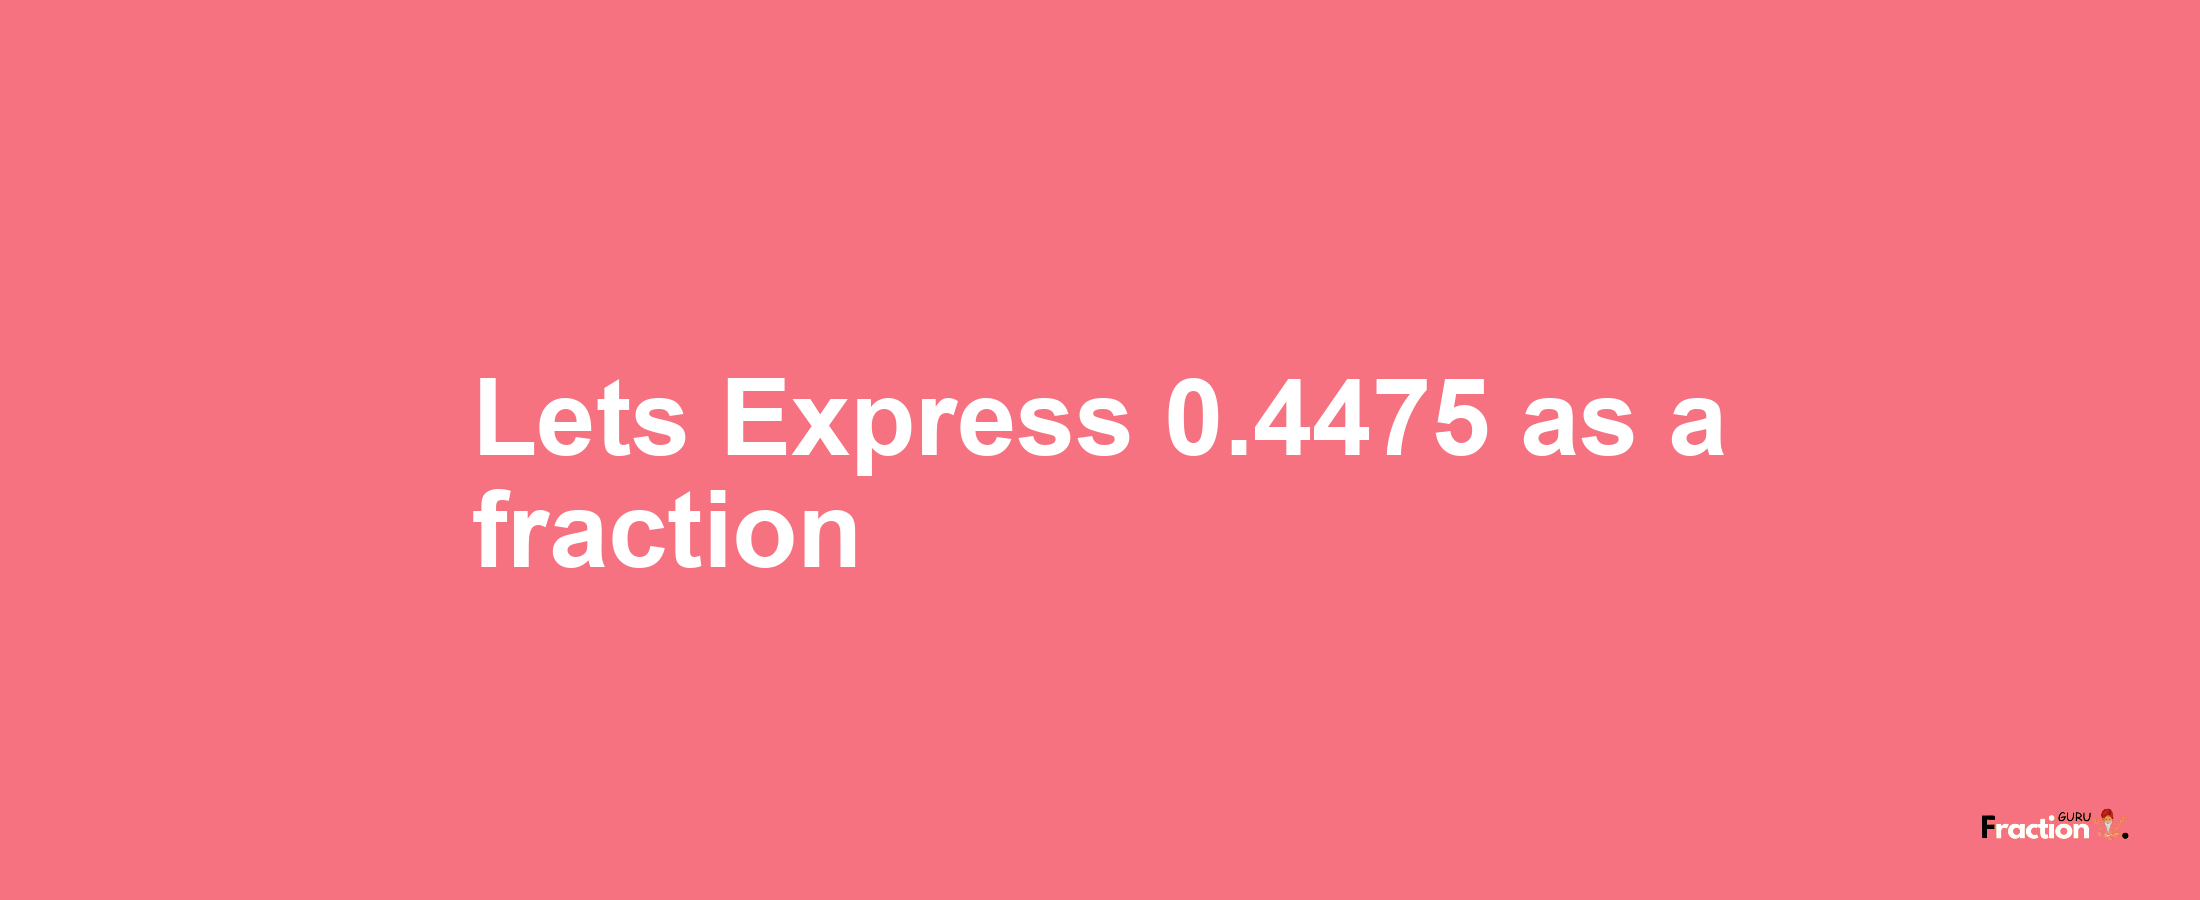 Lets Express 0.4475 as afraction